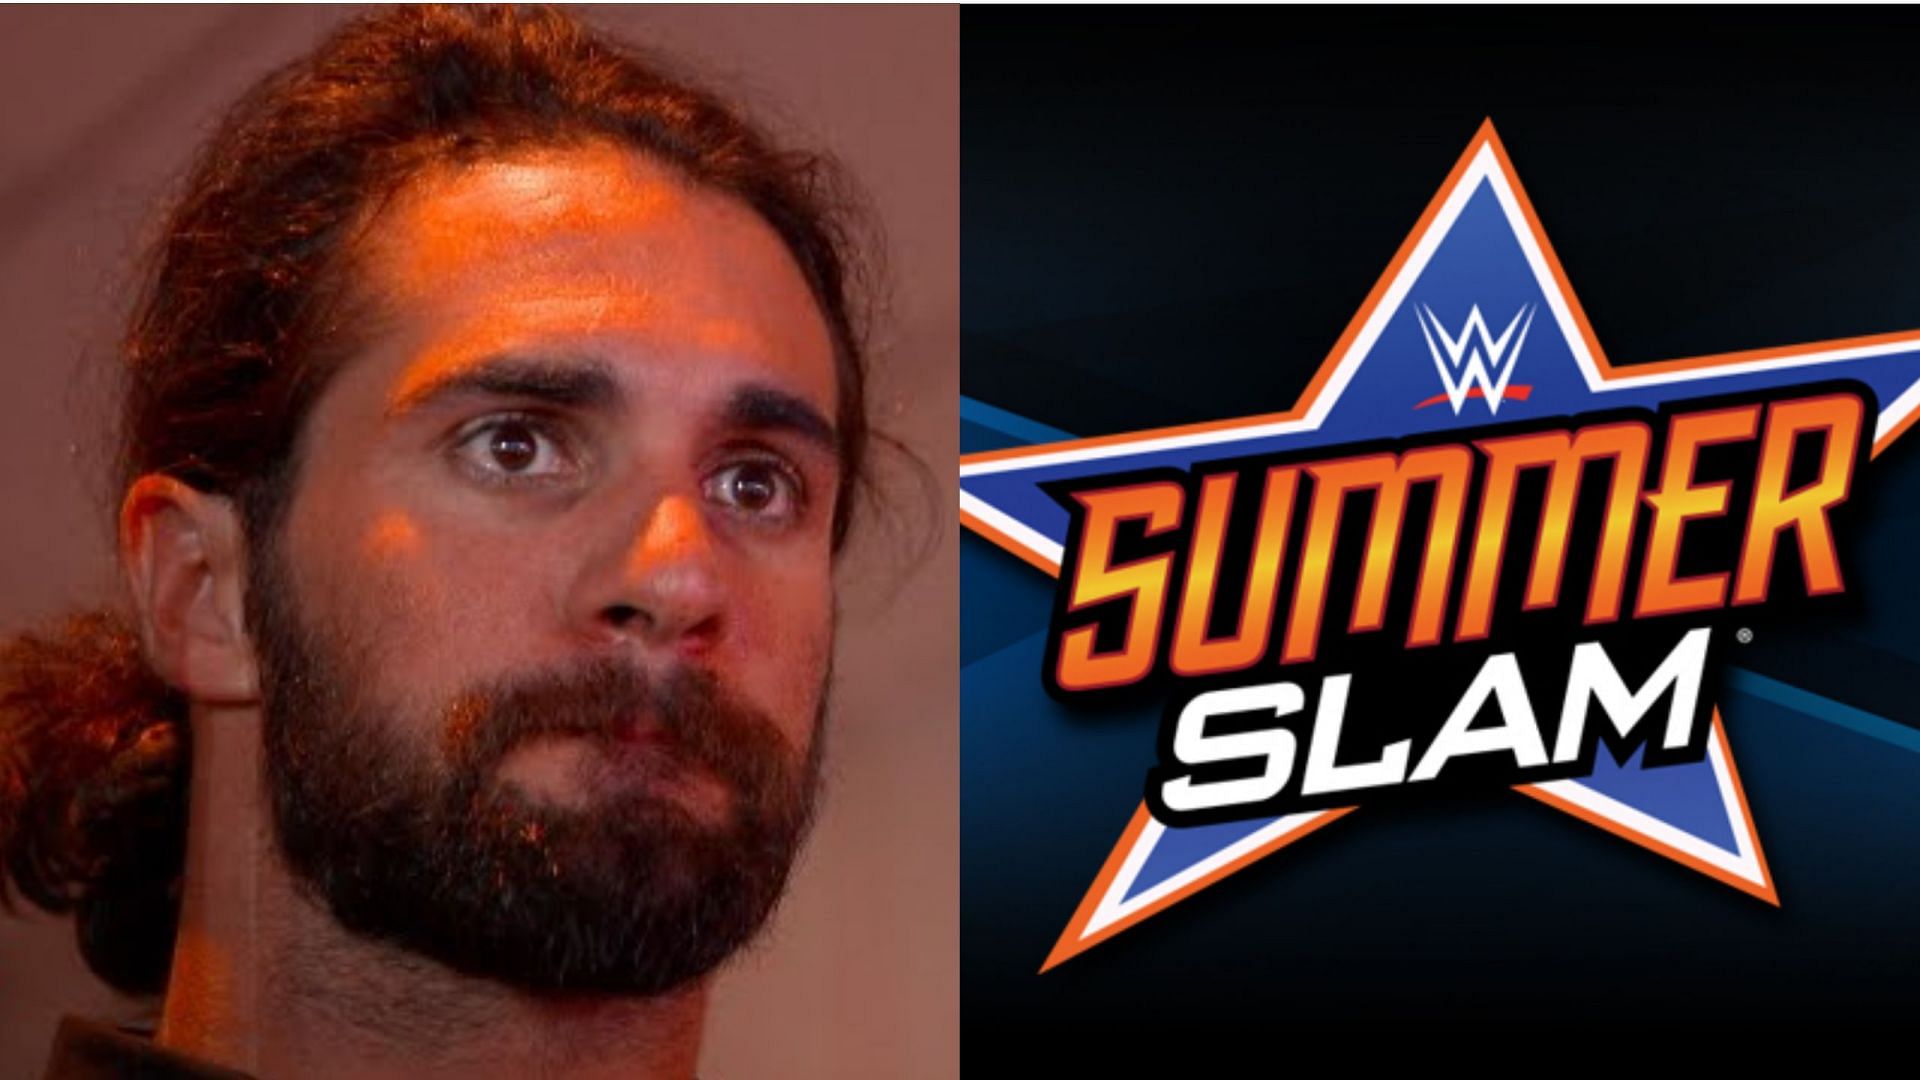 A major last-minute change has been made to SummerSlam